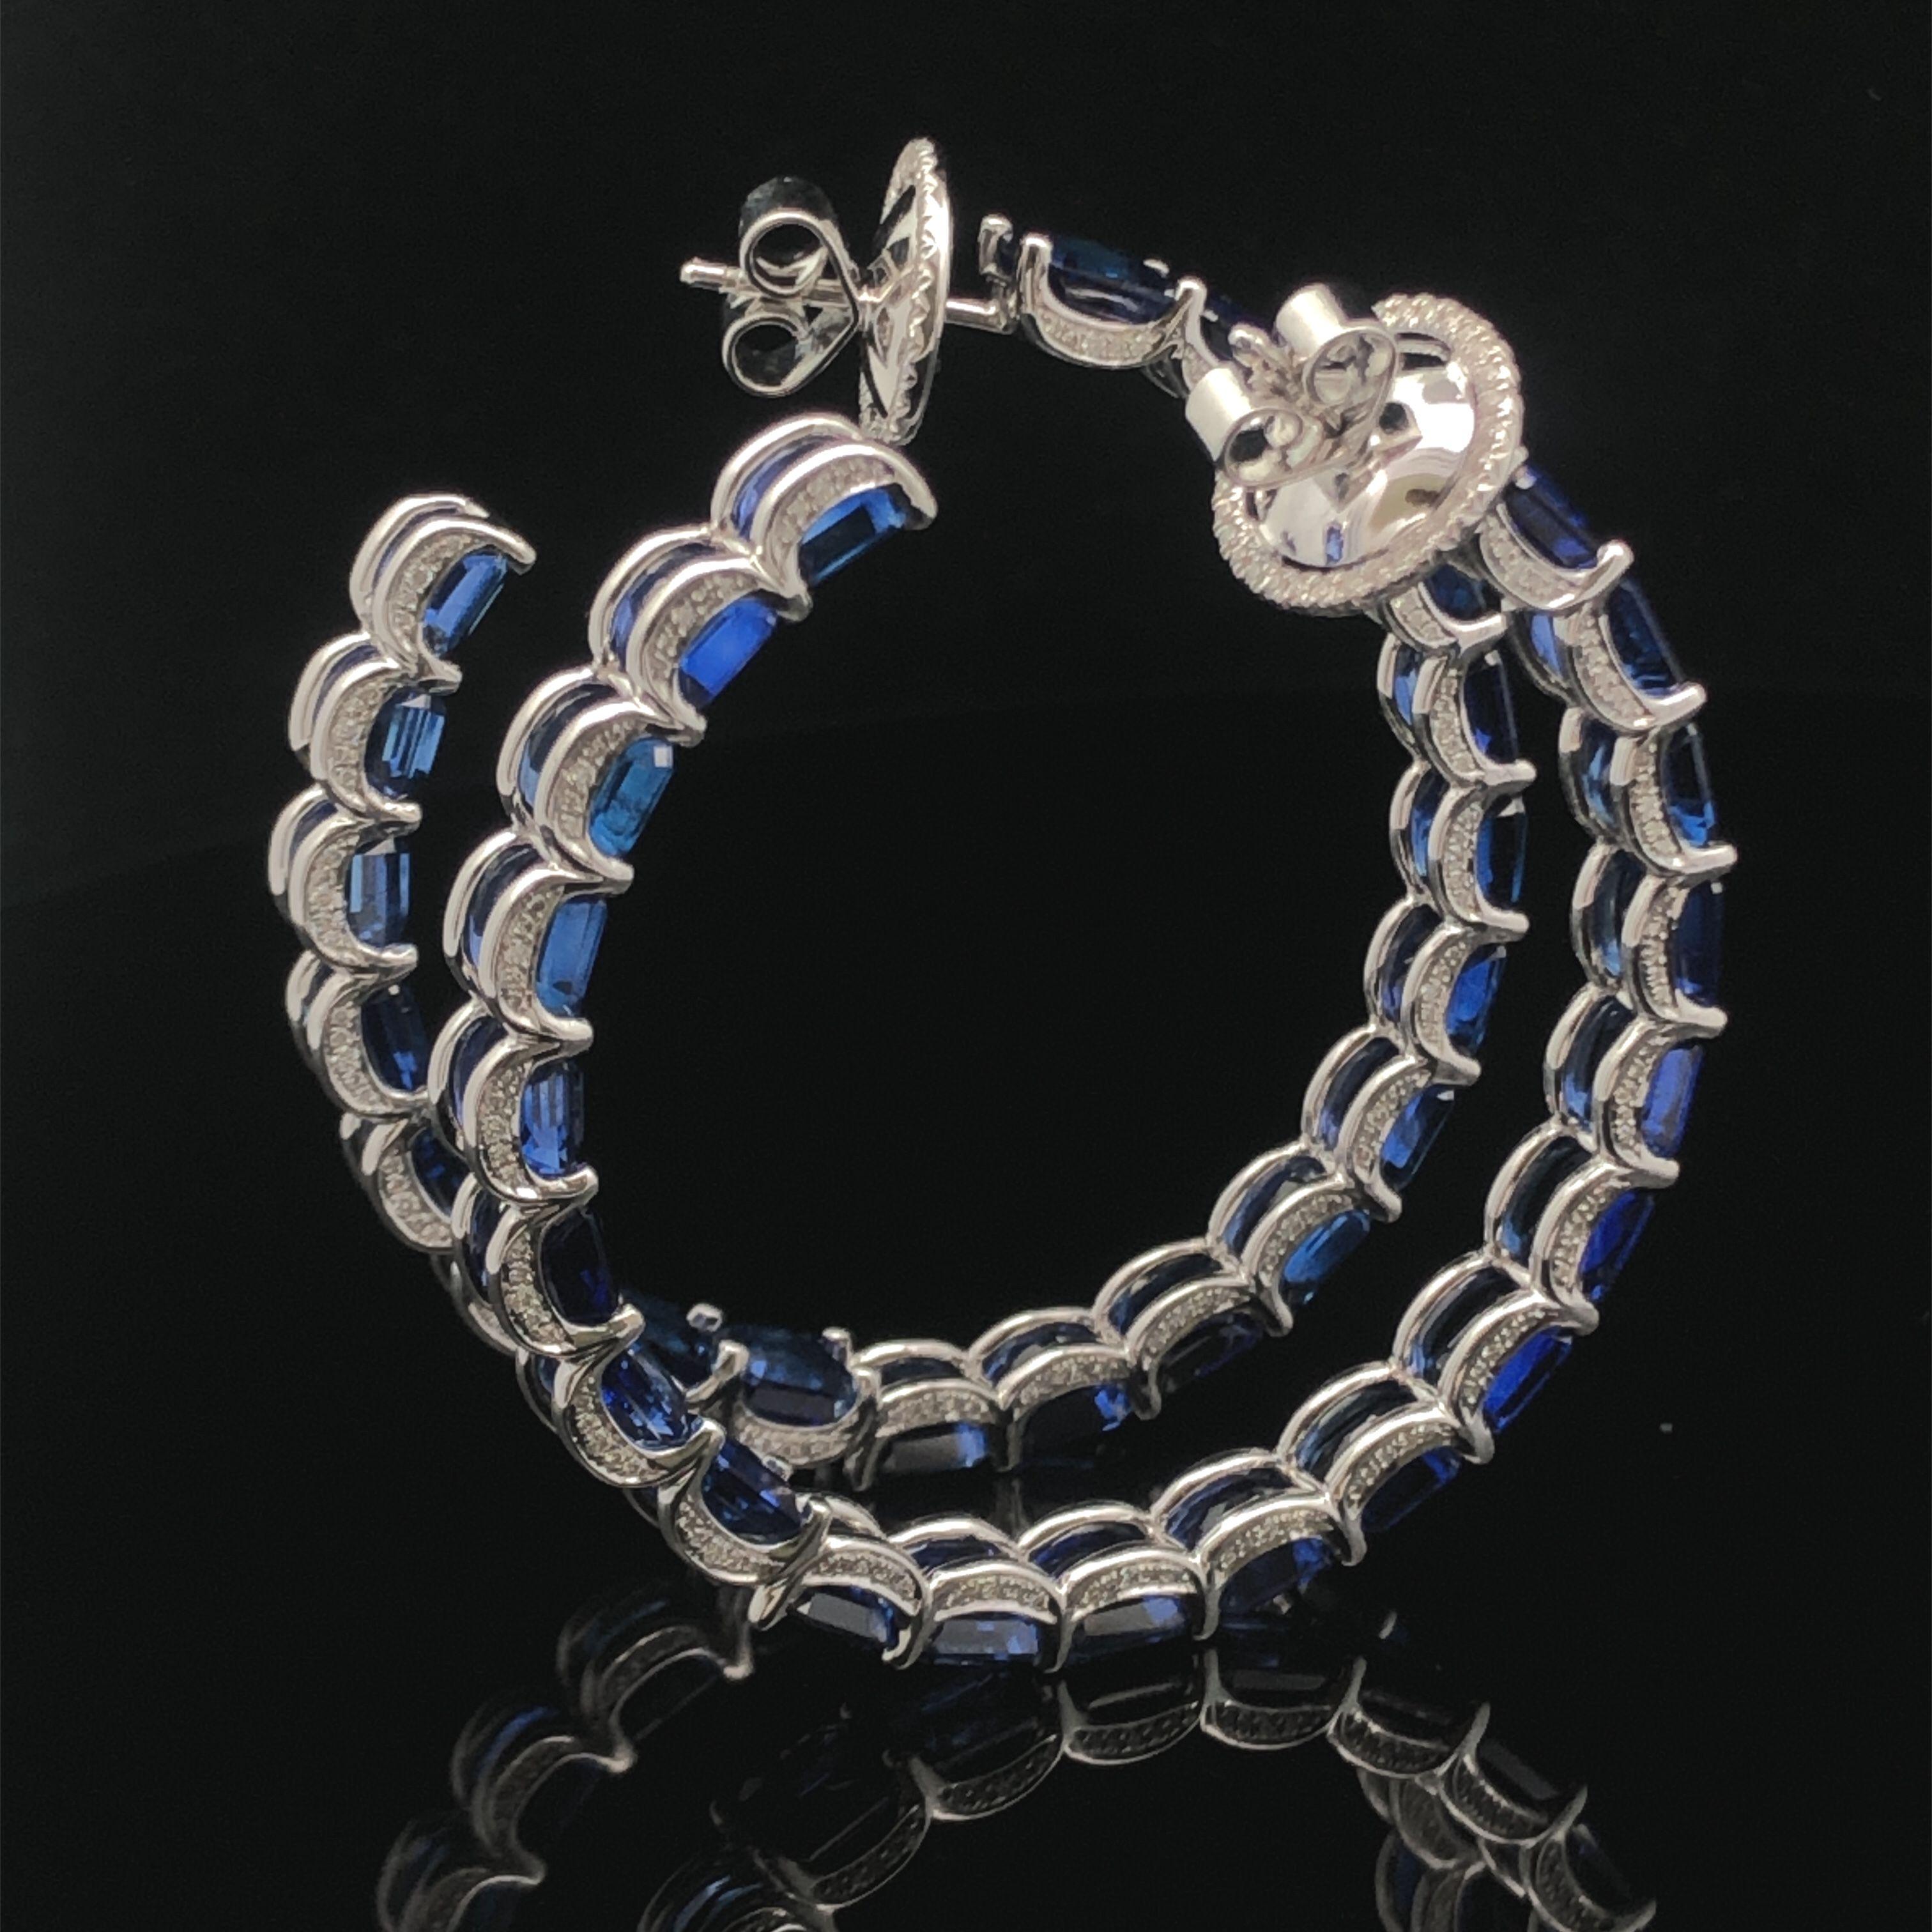 The 18K white gold large hoop earring with a stunning 32.05 CTS Sri Lanka sapphire and 0.77 CTS diamonds is not just a fashion statement; it exudes elegance and sophistication. The luxurious white gold, vibrant sapphire, and dazzling diamonds create